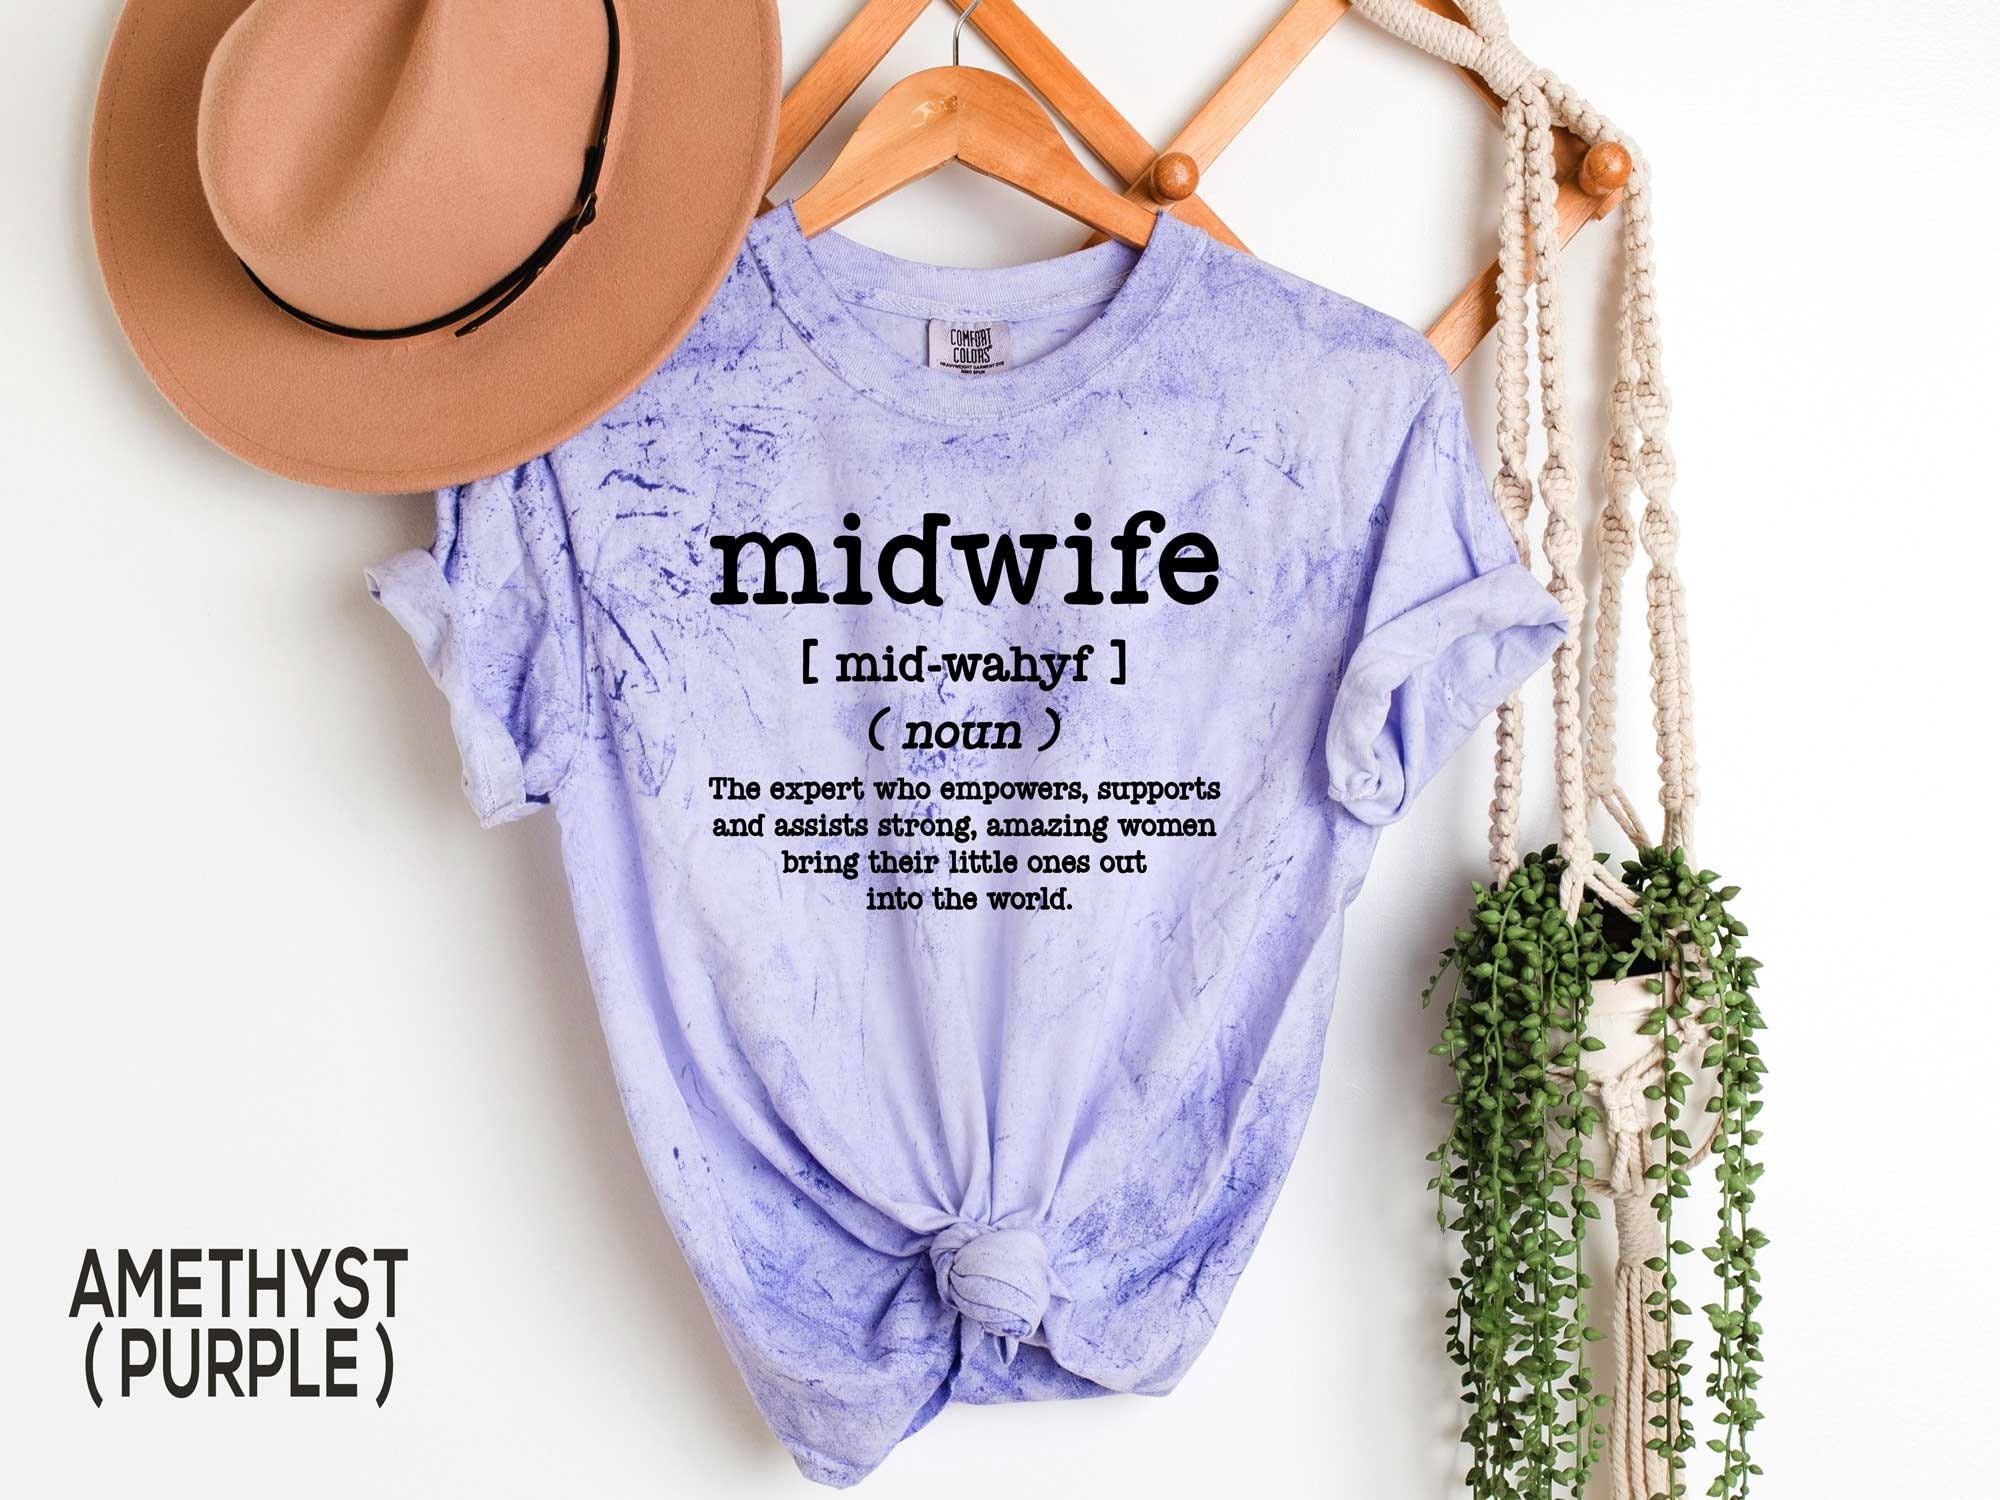 Floral Midwife Shirt Shirt for Midwife Midwife Tie Dye Shirt Midwife Shirt Birth Worker Shirt Midwife Gift Midwife Birth T Shirt